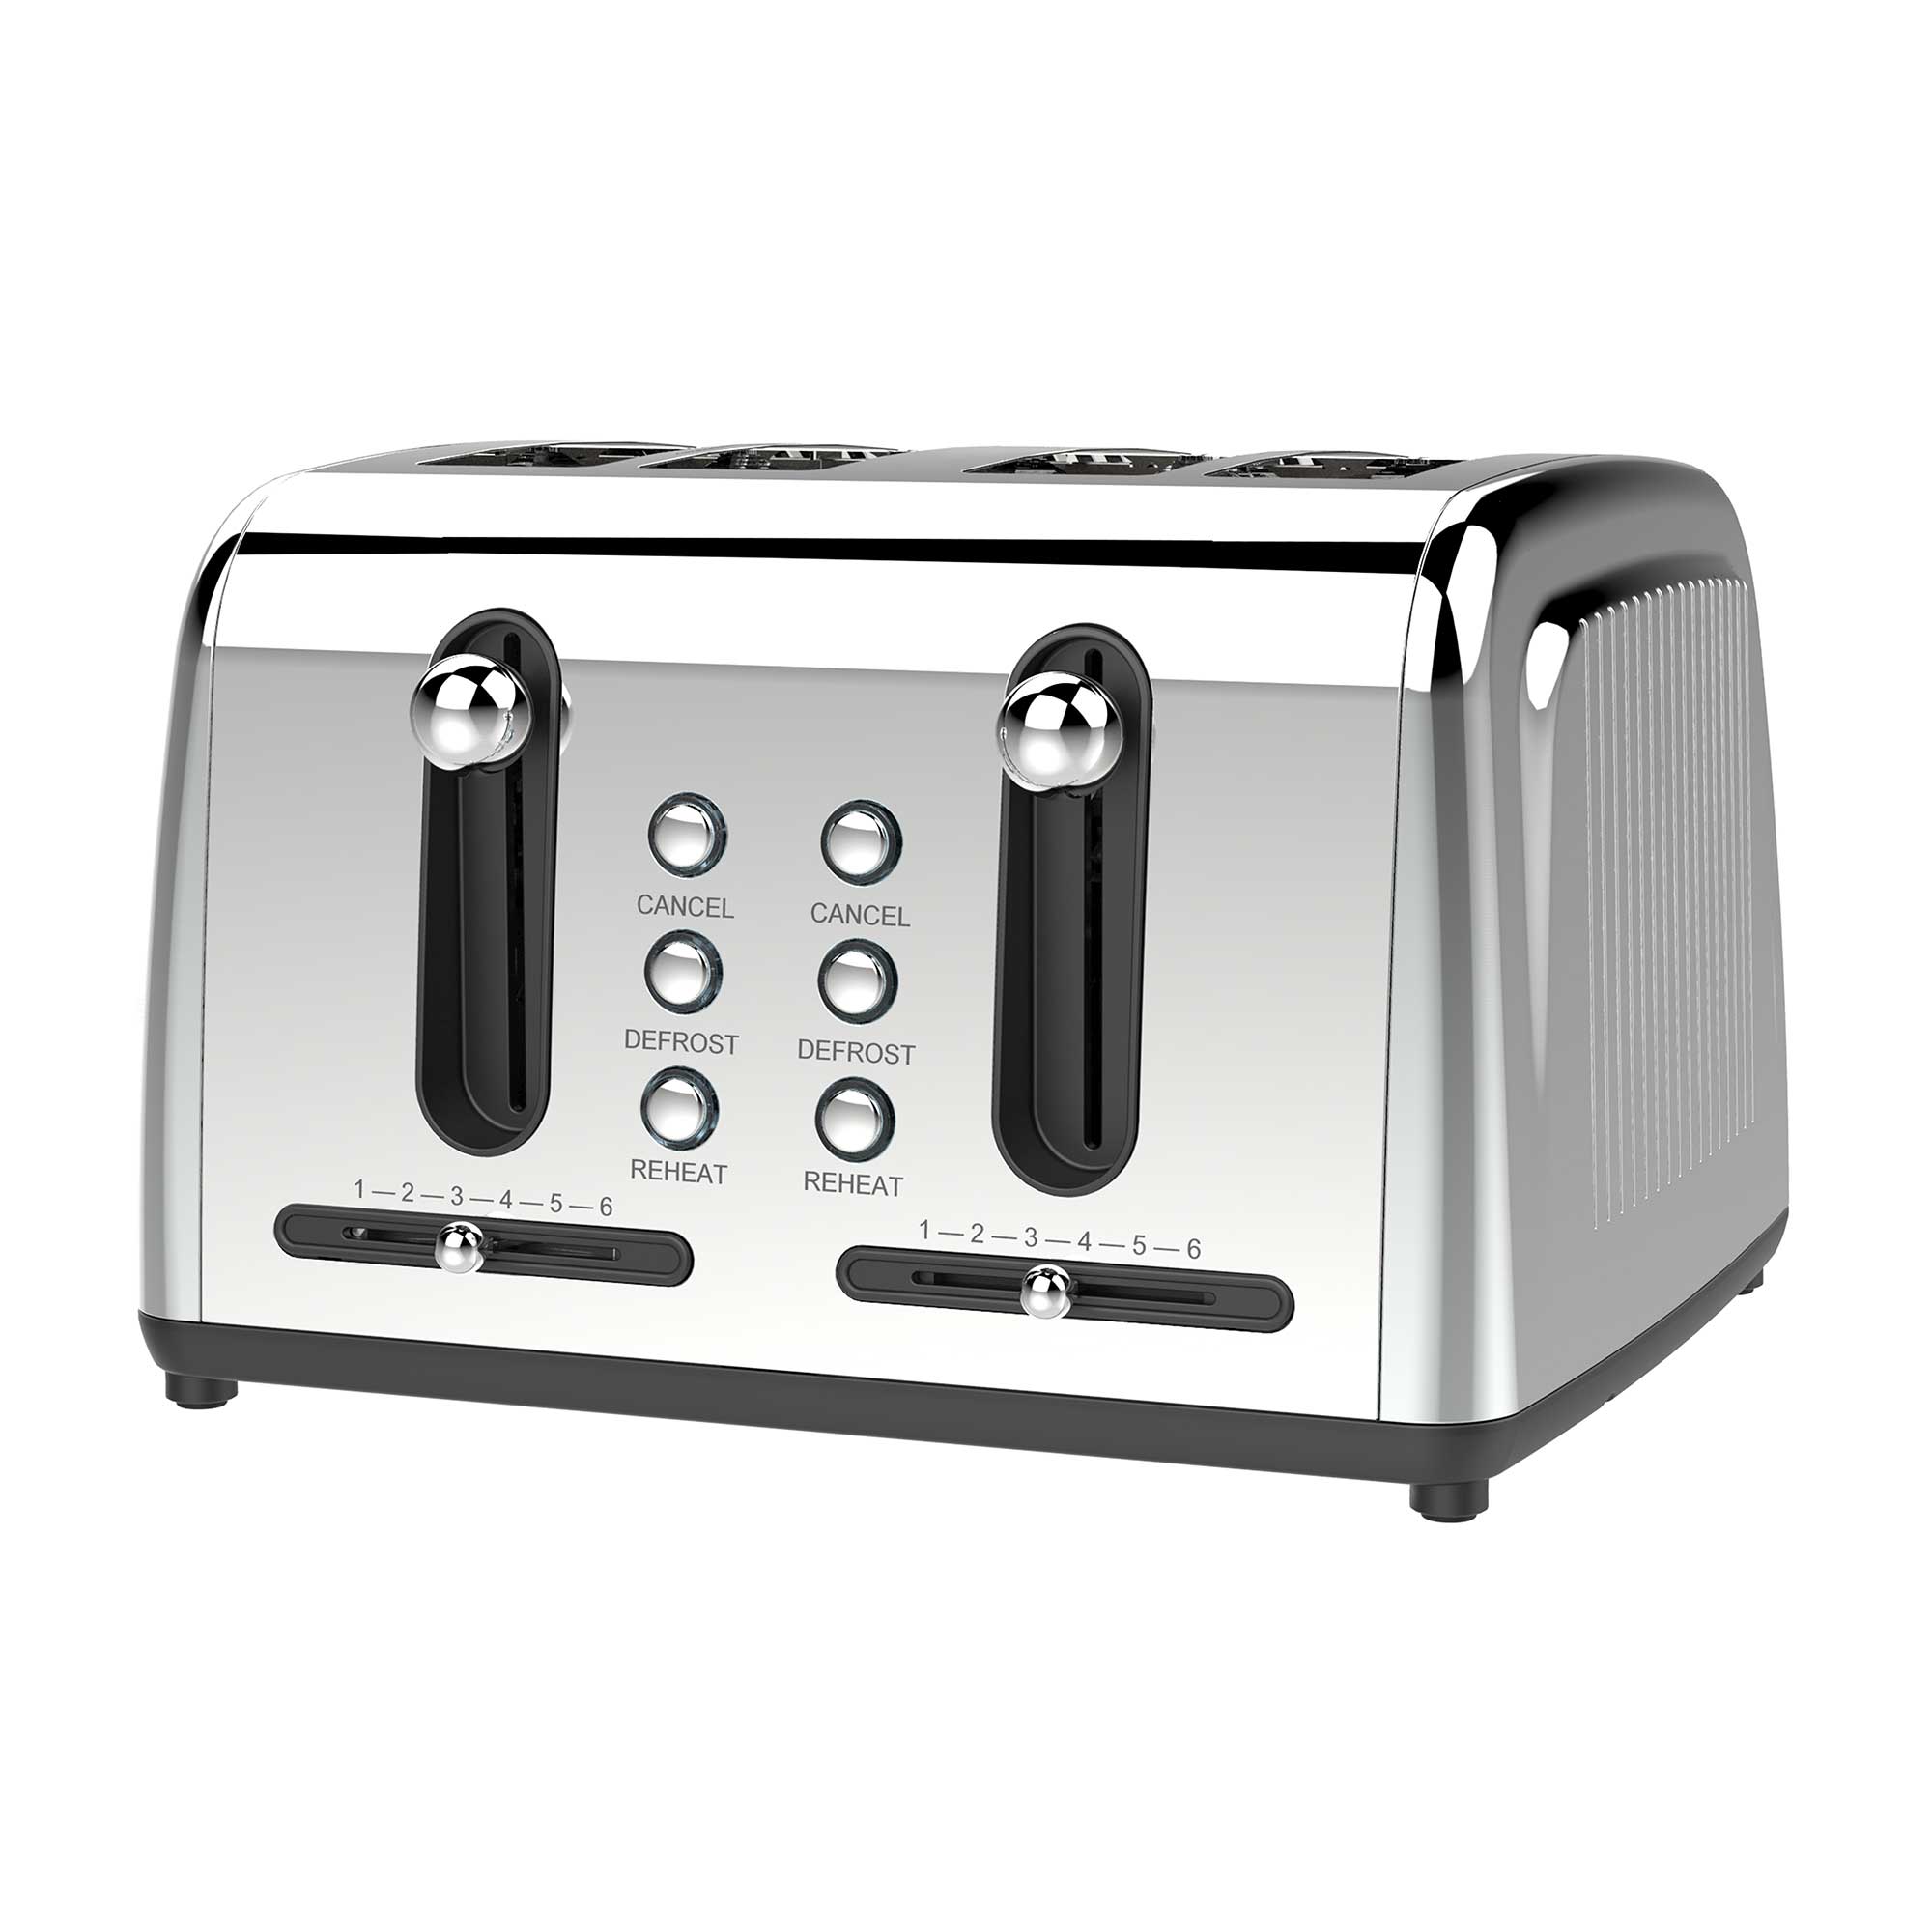 Cuisinart Stay 4-Slice Toaster, Stainless Steel, Toasters